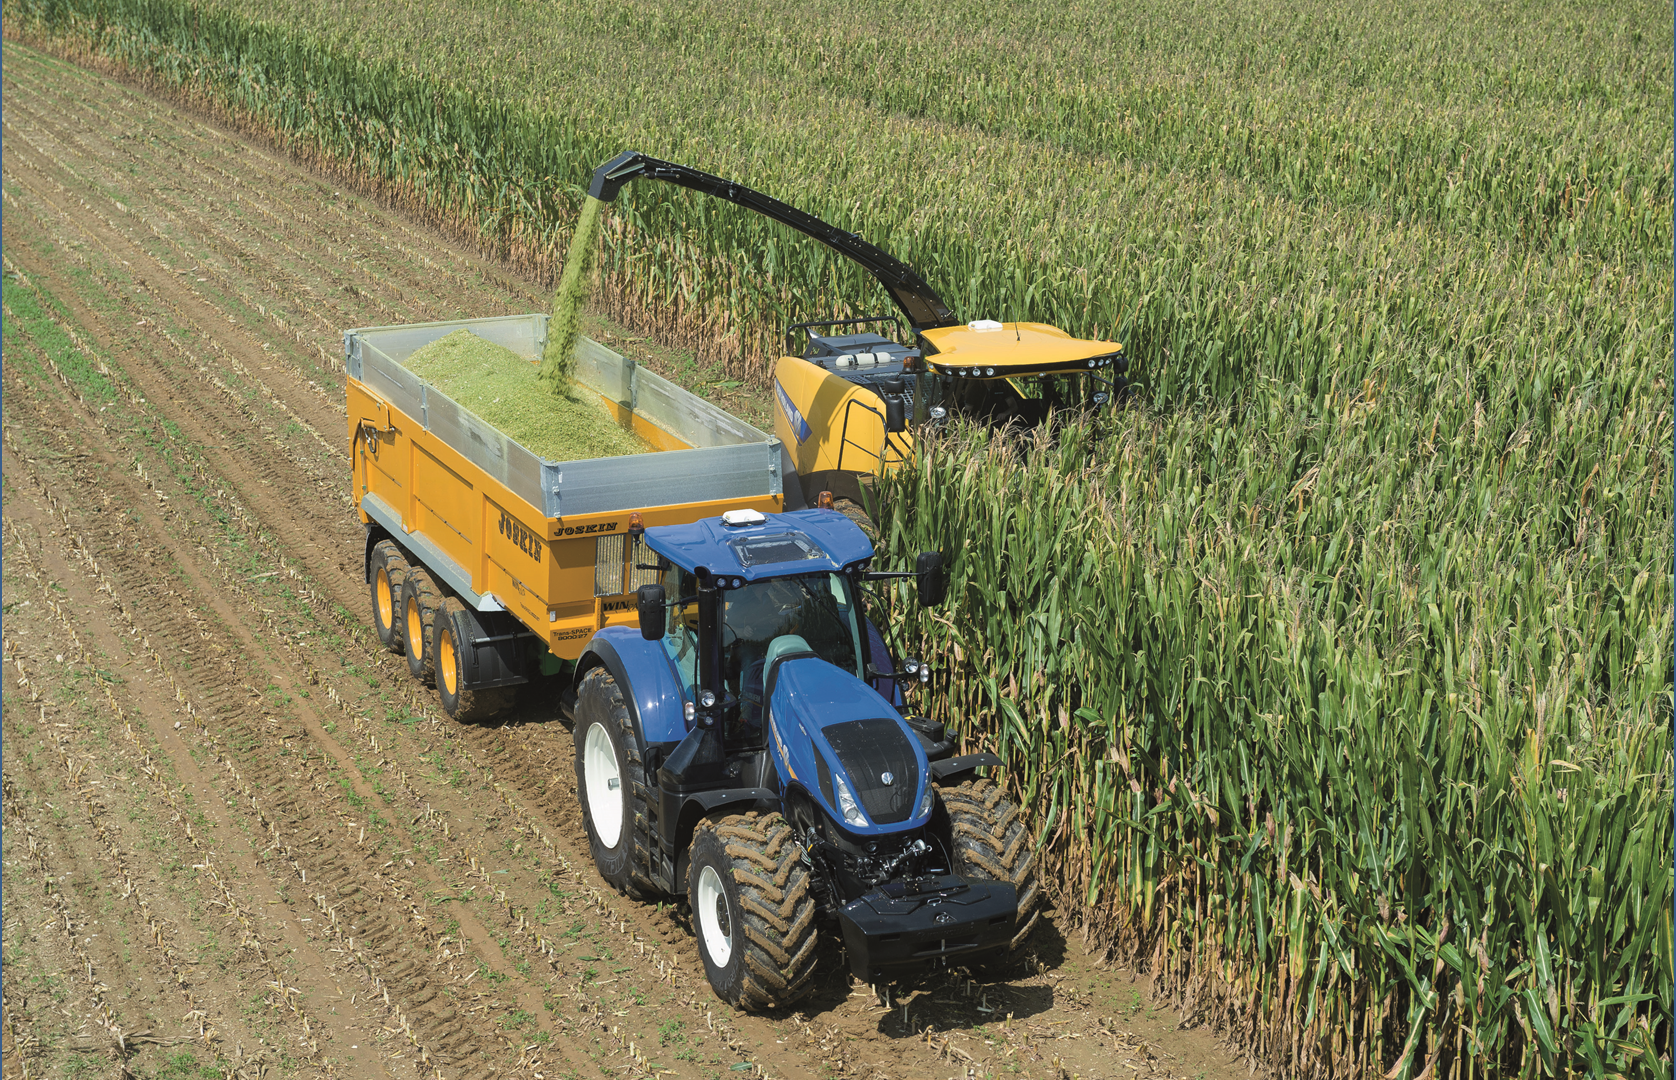 New Holland Agriculture announced today it signed a preferred partnership agreement with Dinamica Generale (DG)